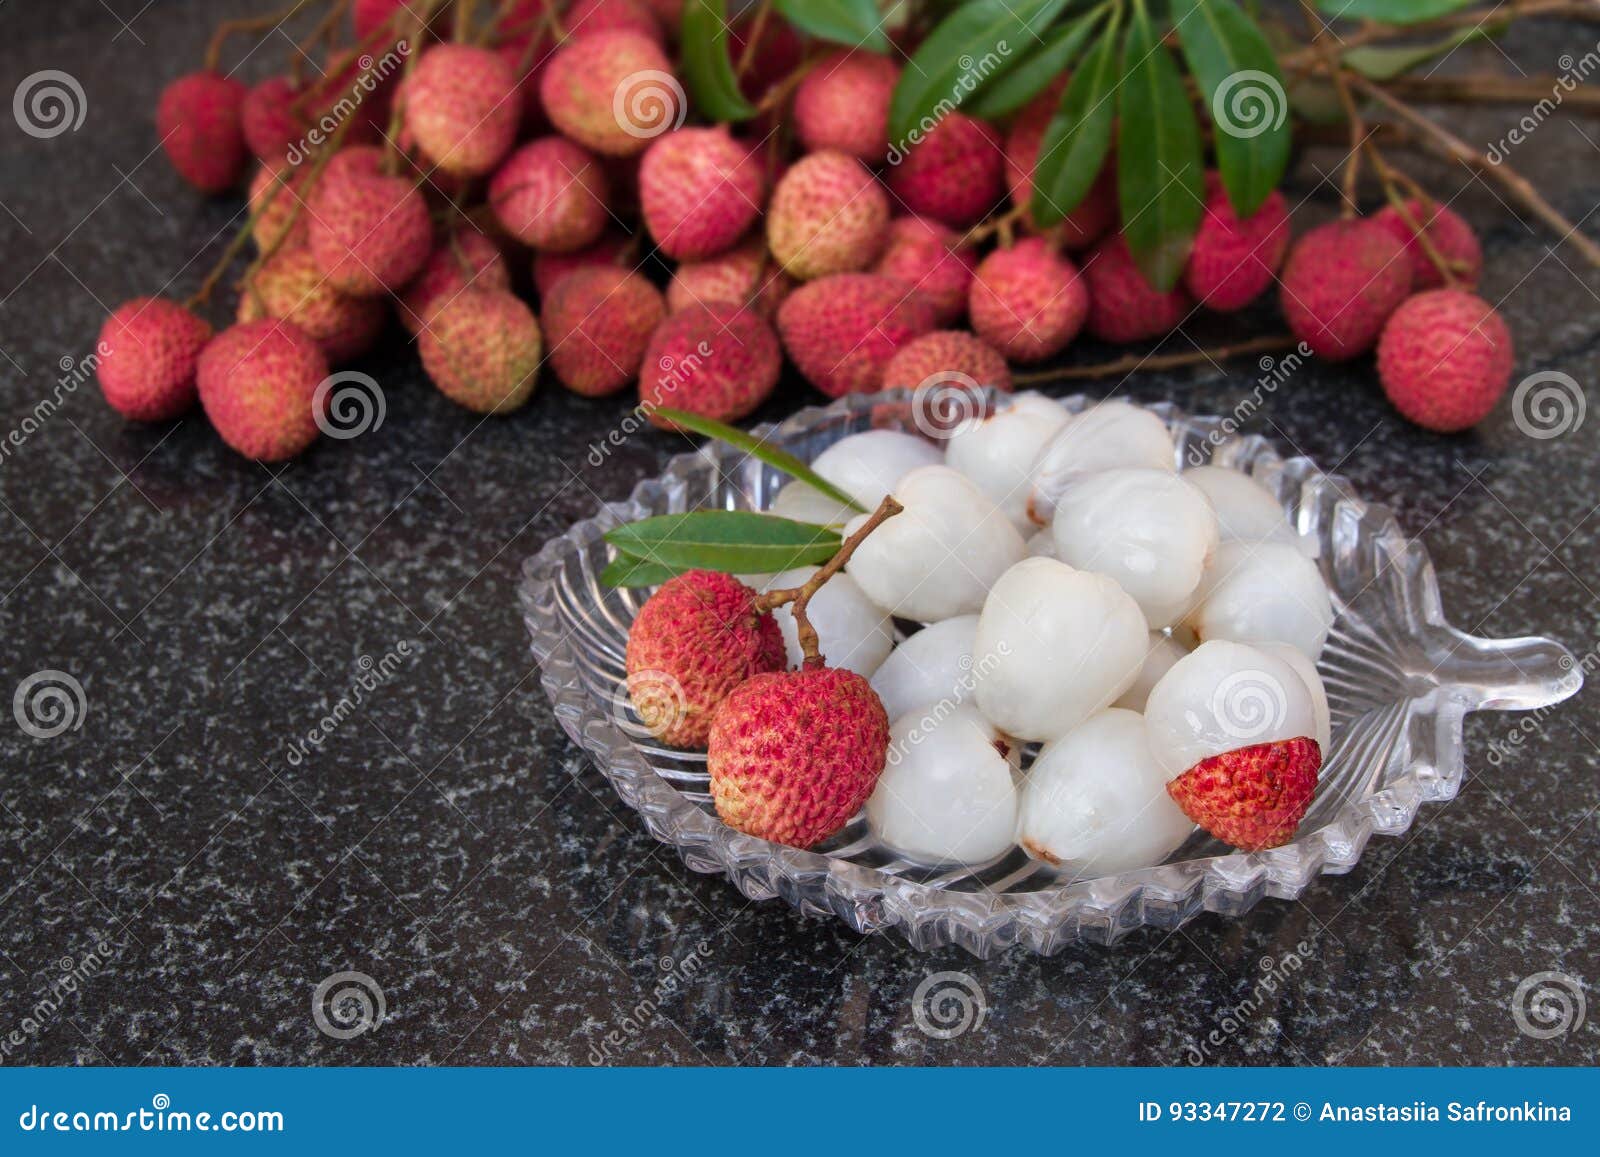 Litchi Fruits Fresh Juicy Lychee Fruit On A Glass Plate Peeled Lychee Fruit Stock Photo Image Of Berry Lichi 93347272,Sansevieria Cylindrica Care